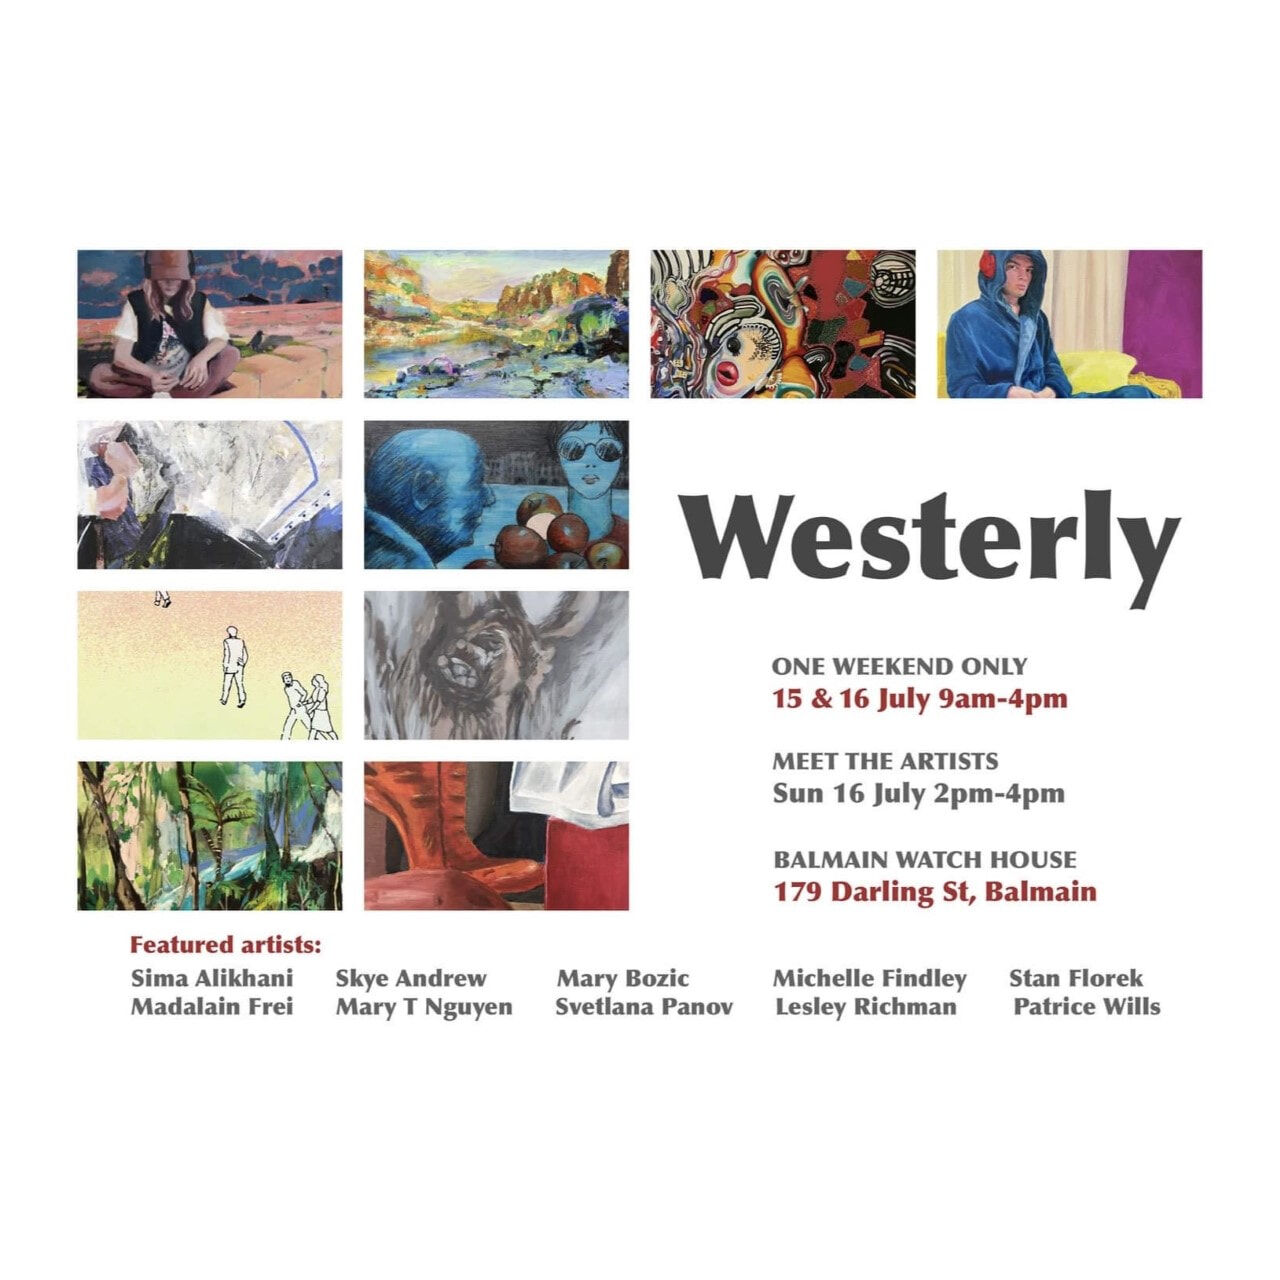 Westerly - online tile for my site